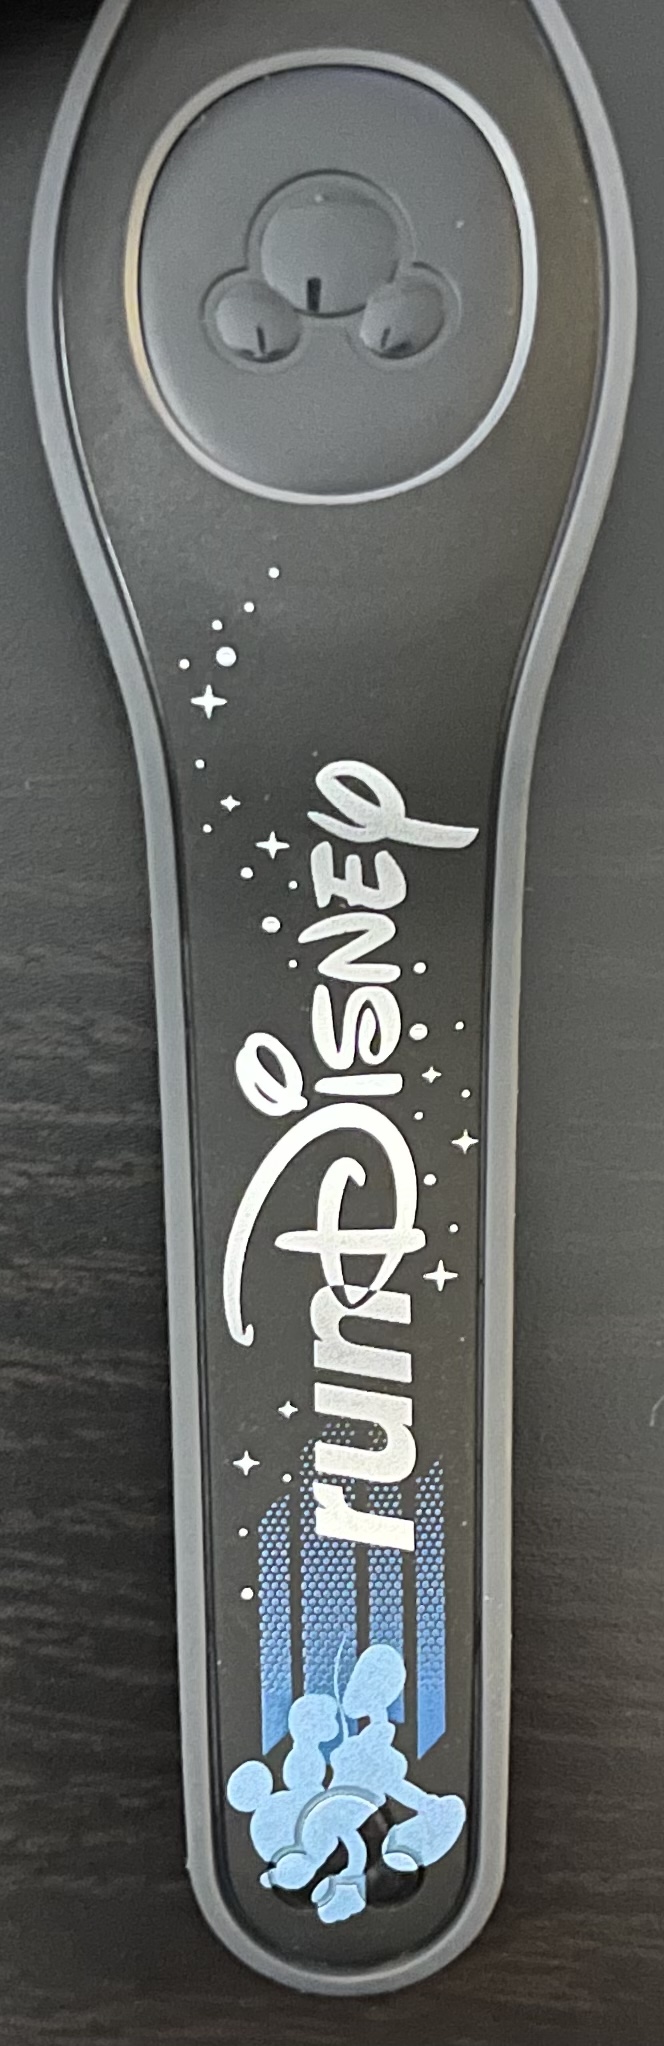 runDisney Limited Edition 1600 MagicBand has been released today